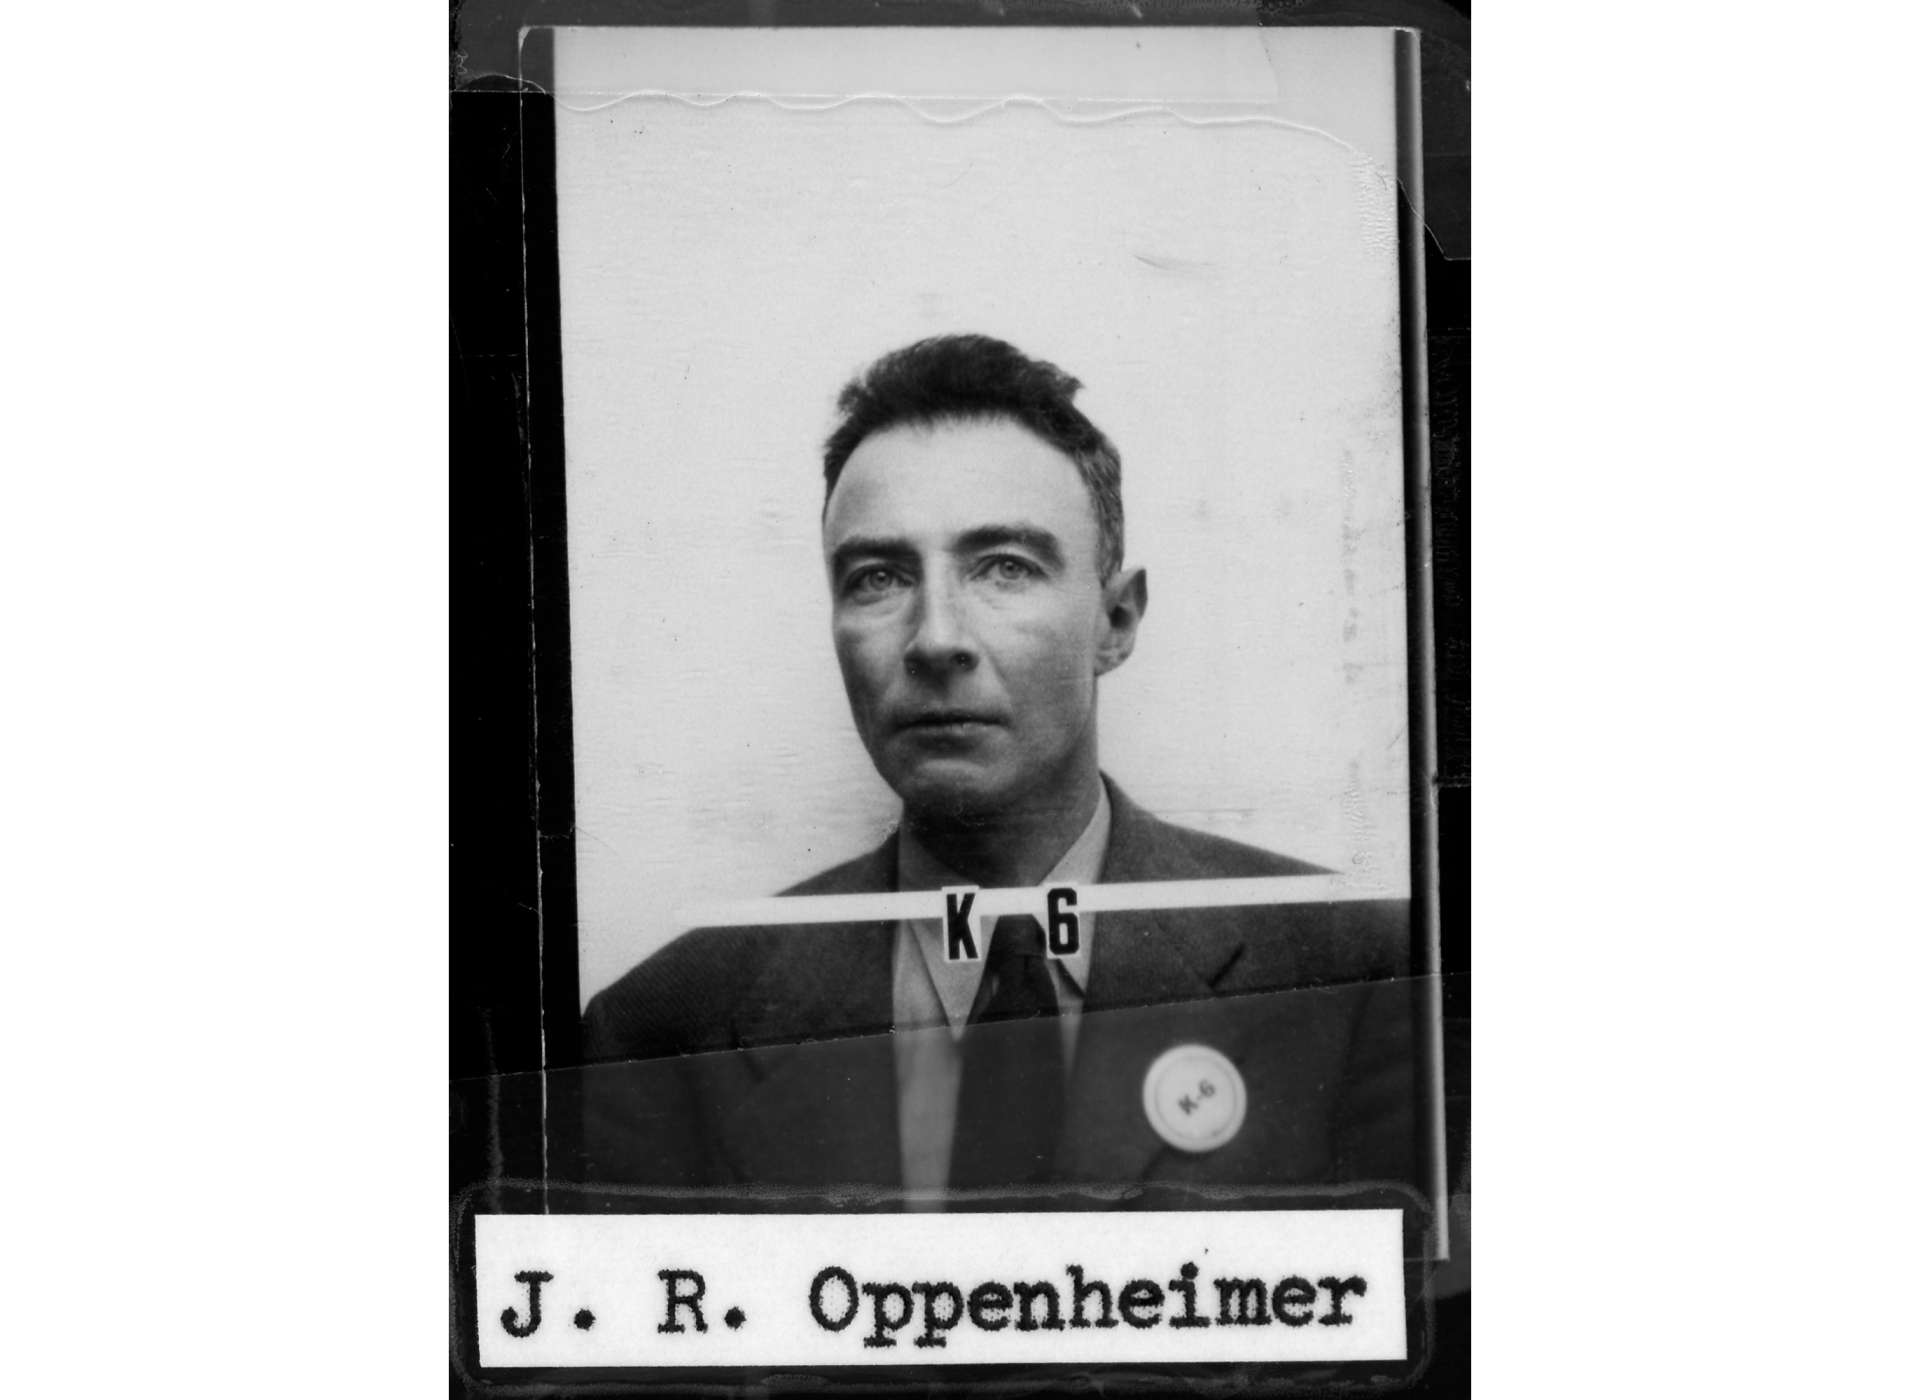 This is a photo of Oppenheimer’s security badge for Los Alamos (from the Los Alamos National Laboratory archives)